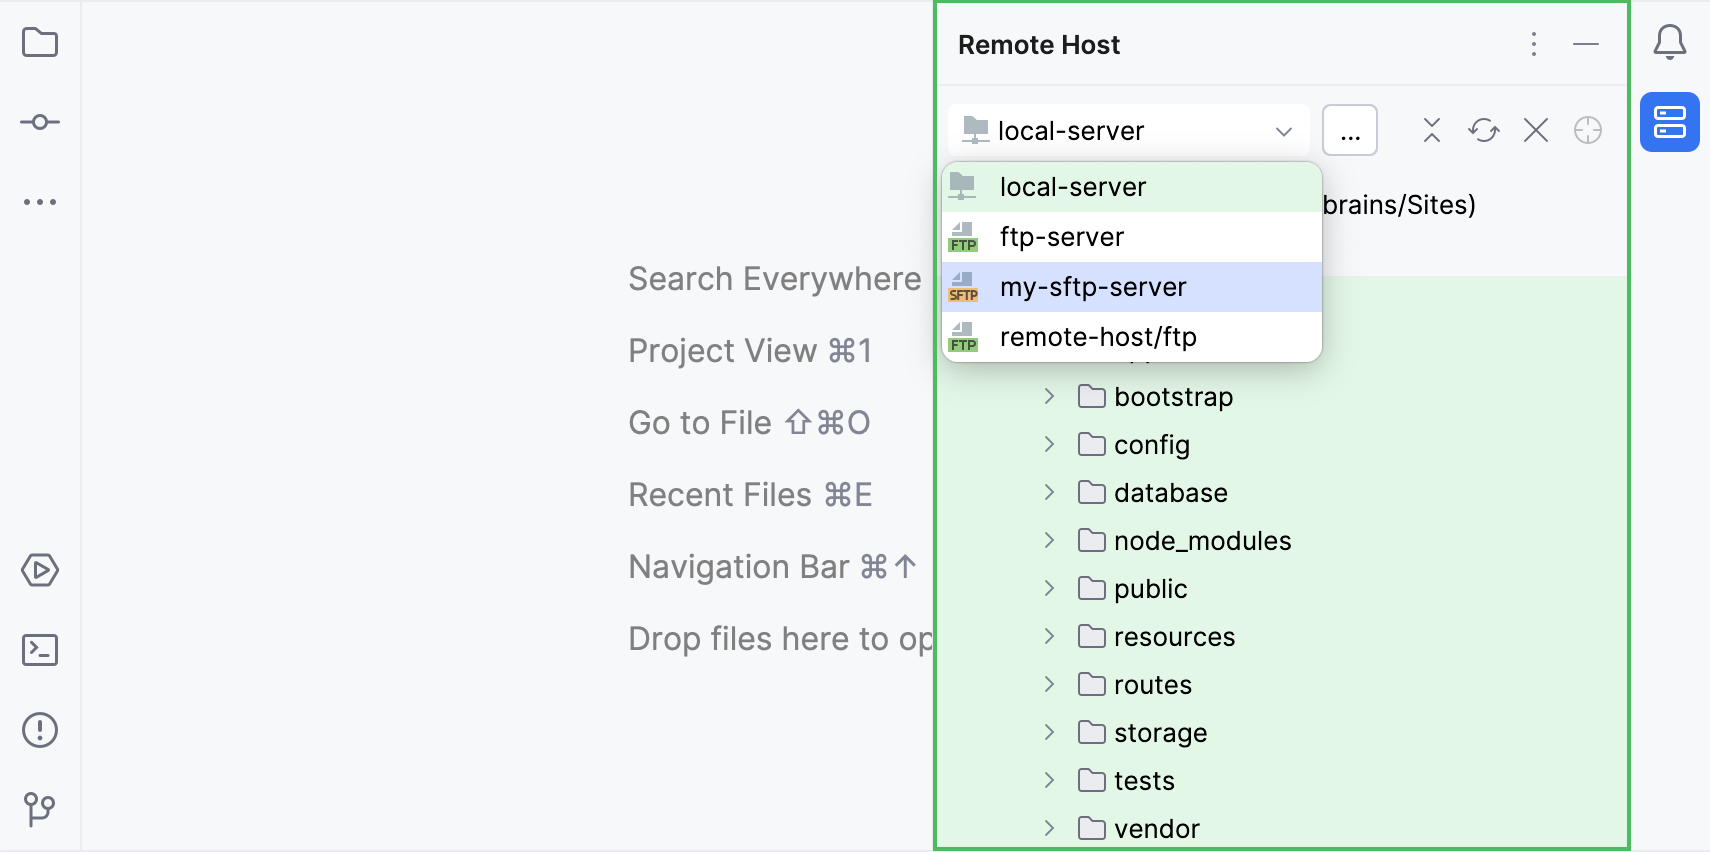 Open the Remote Host tool window and select the server